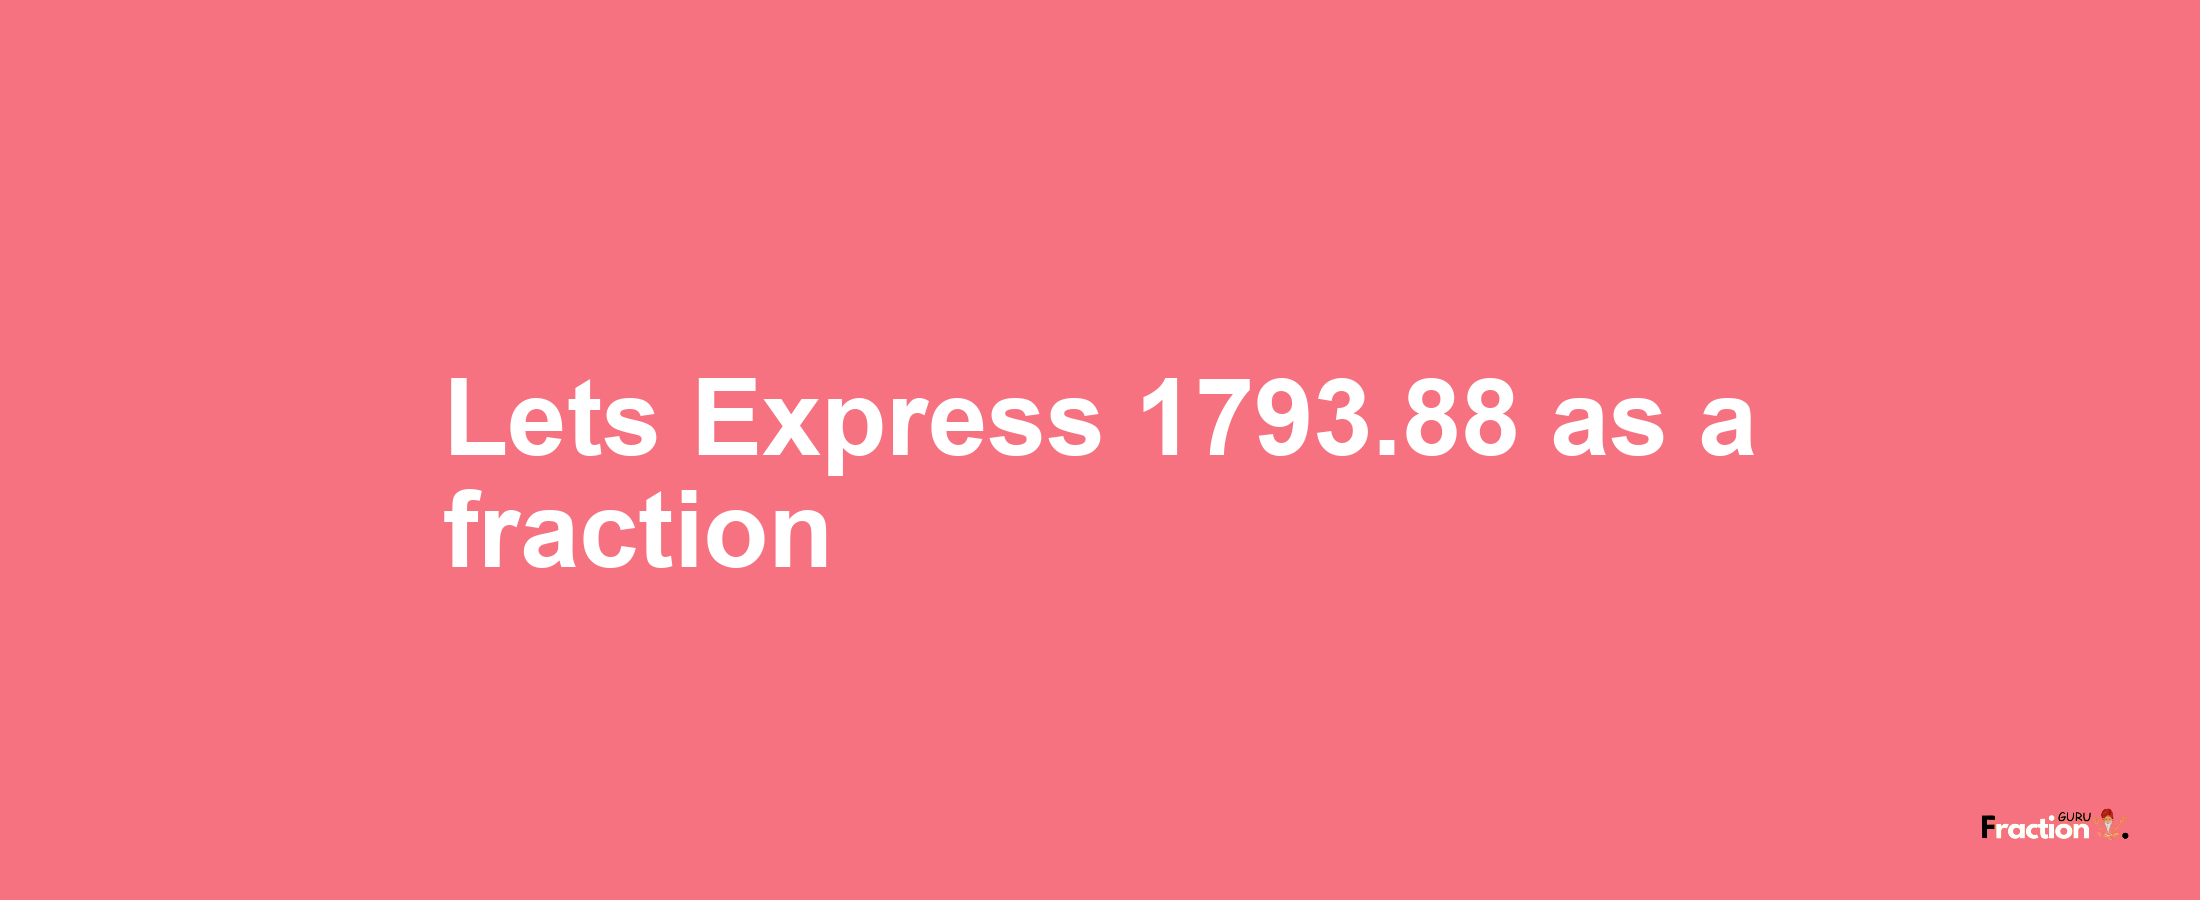 Lets Express 1793.88 as afraction